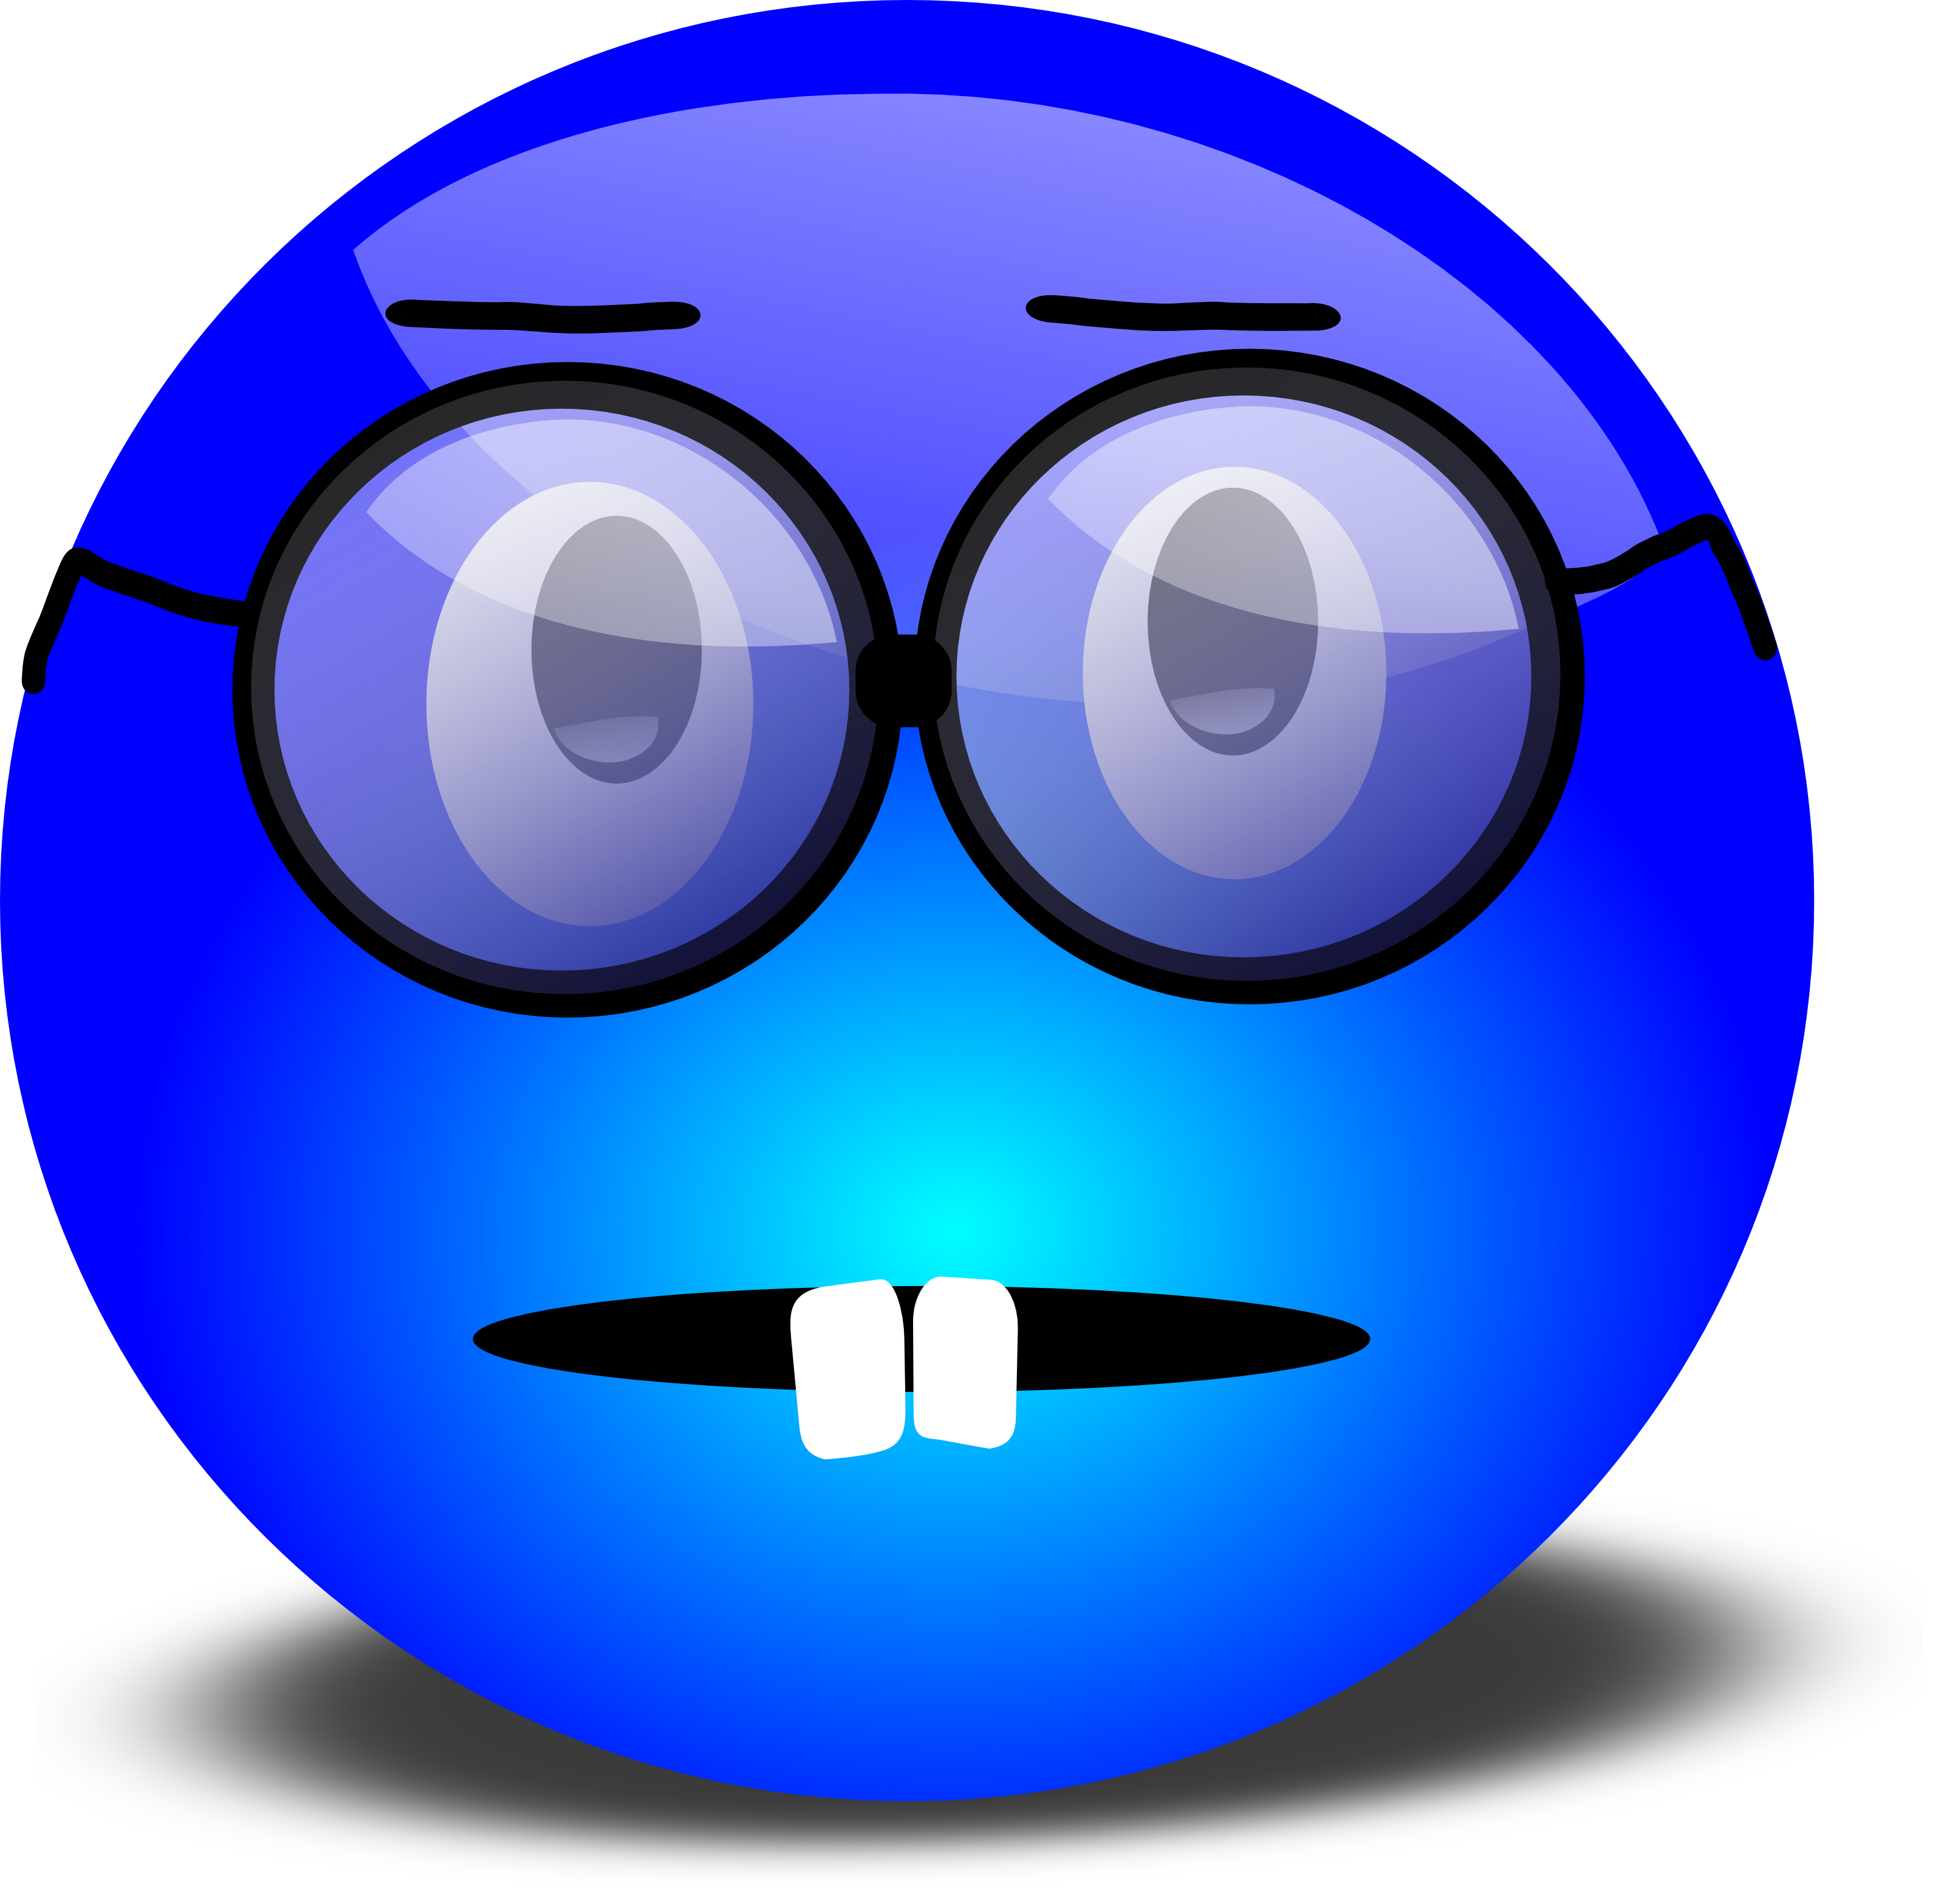 Nerdy Blue Smiley With Overbite and Glasses - Free 3D ...